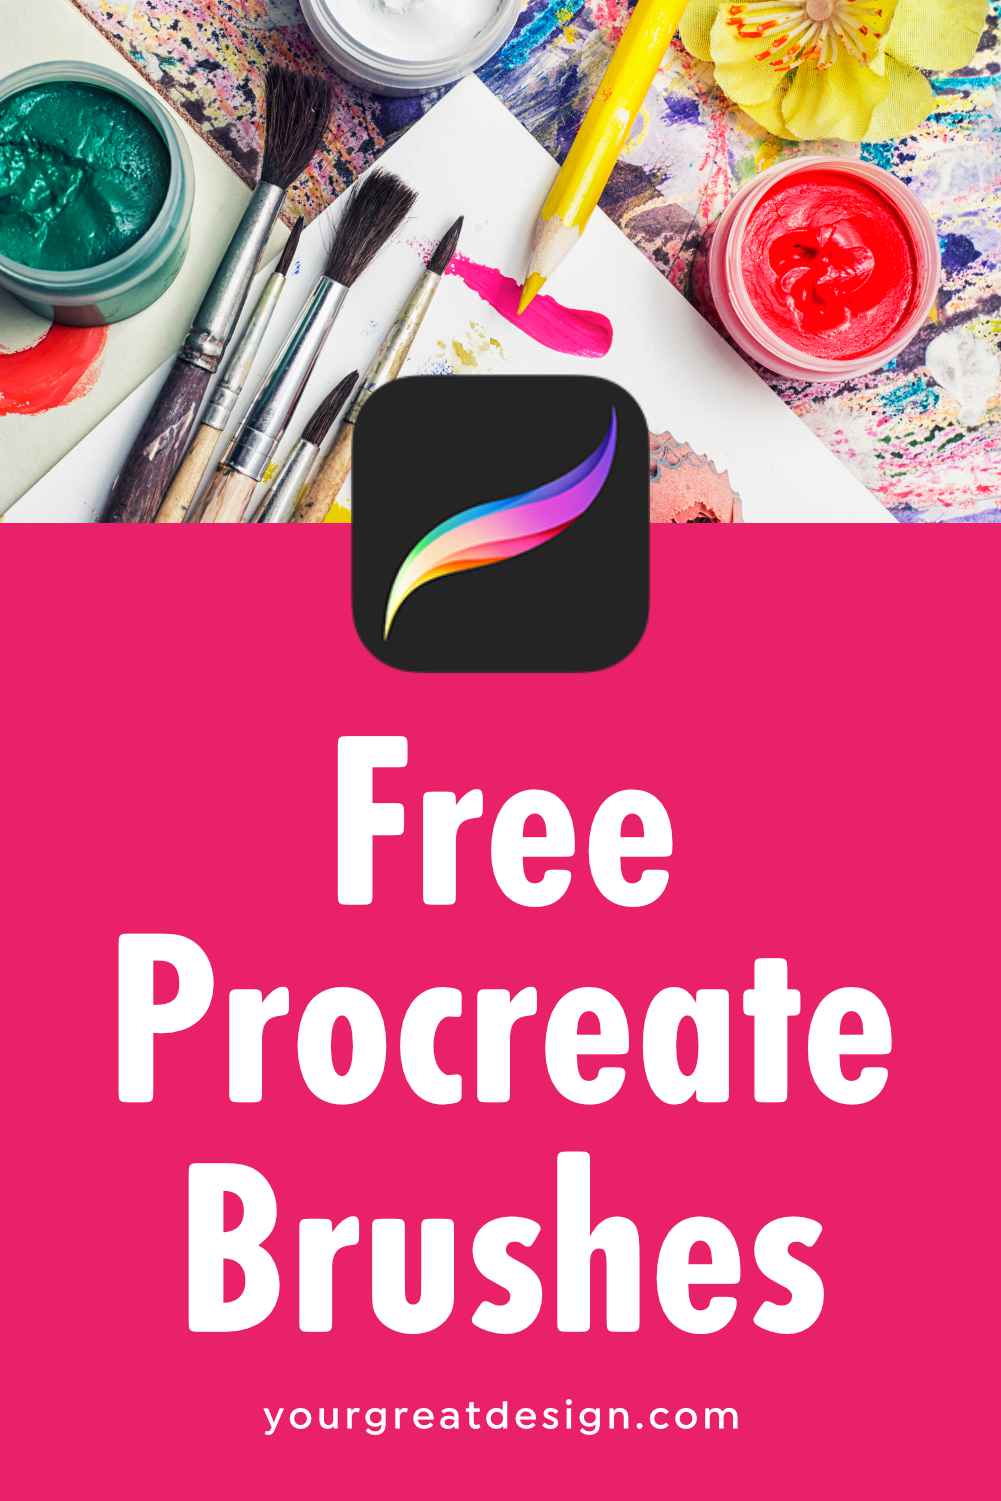 how to get procreate brushes for free